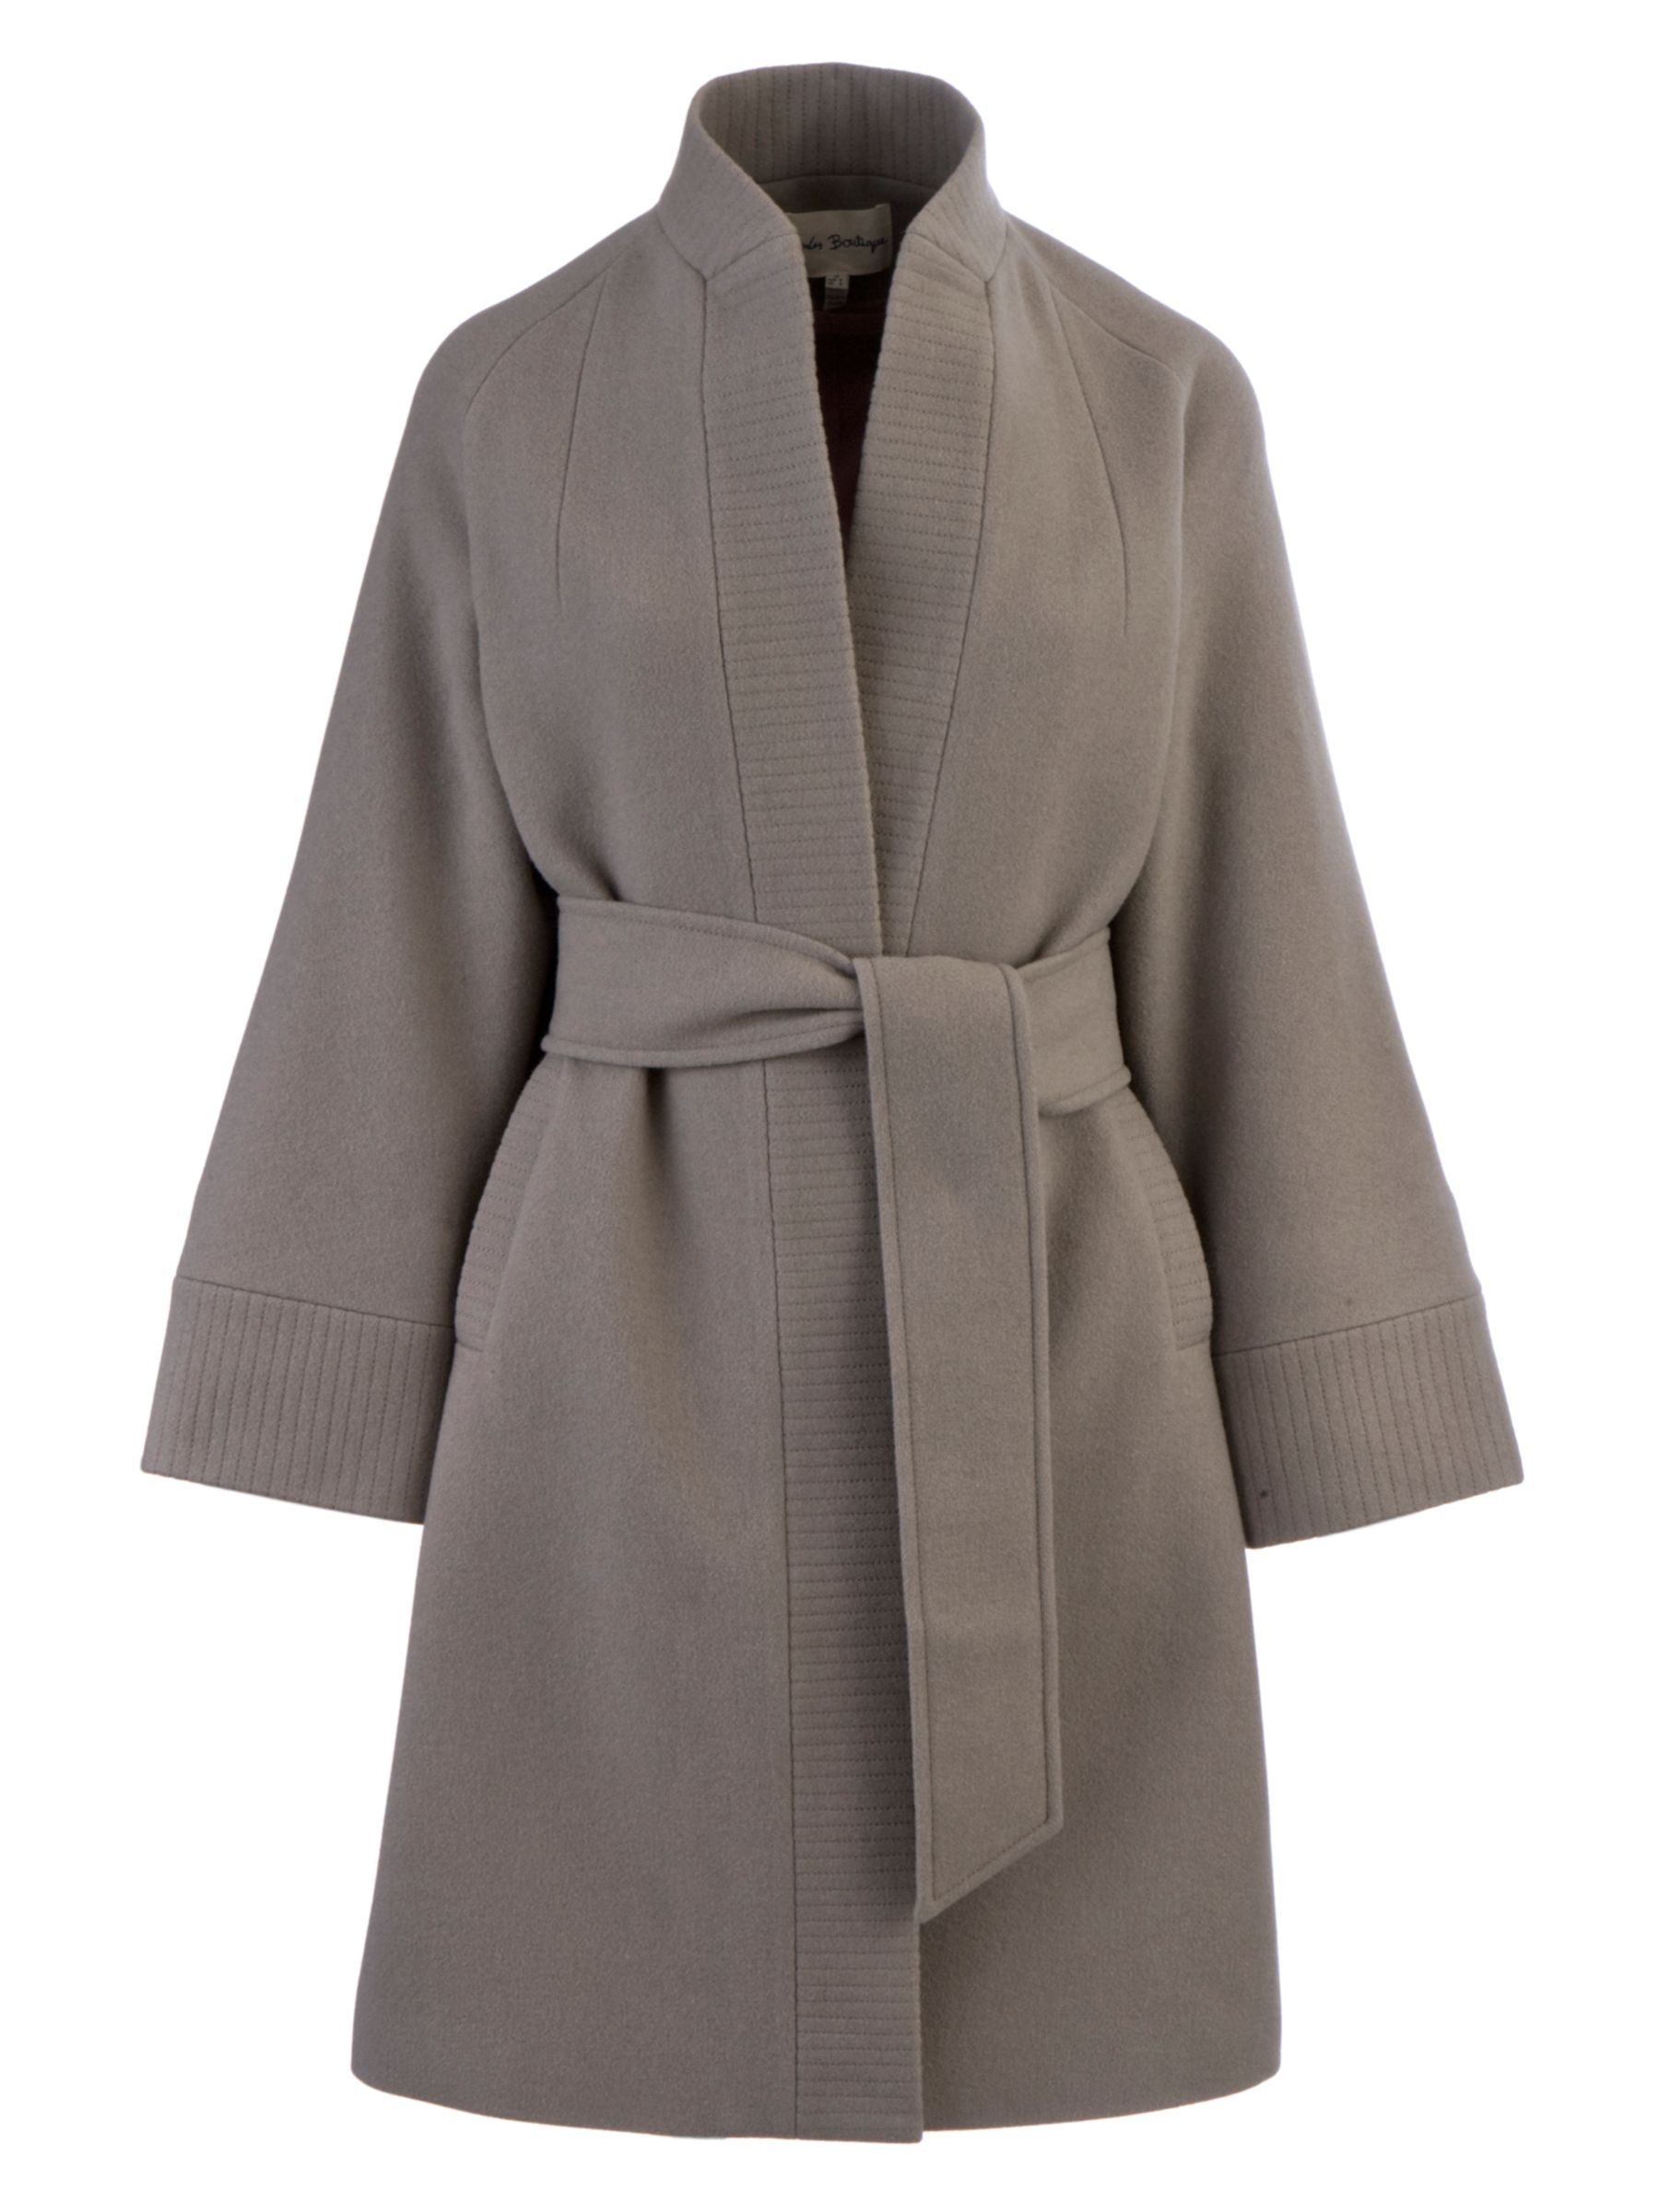 Joules Farell Edge to Edge Coat, Soft Grey at JohnLewis